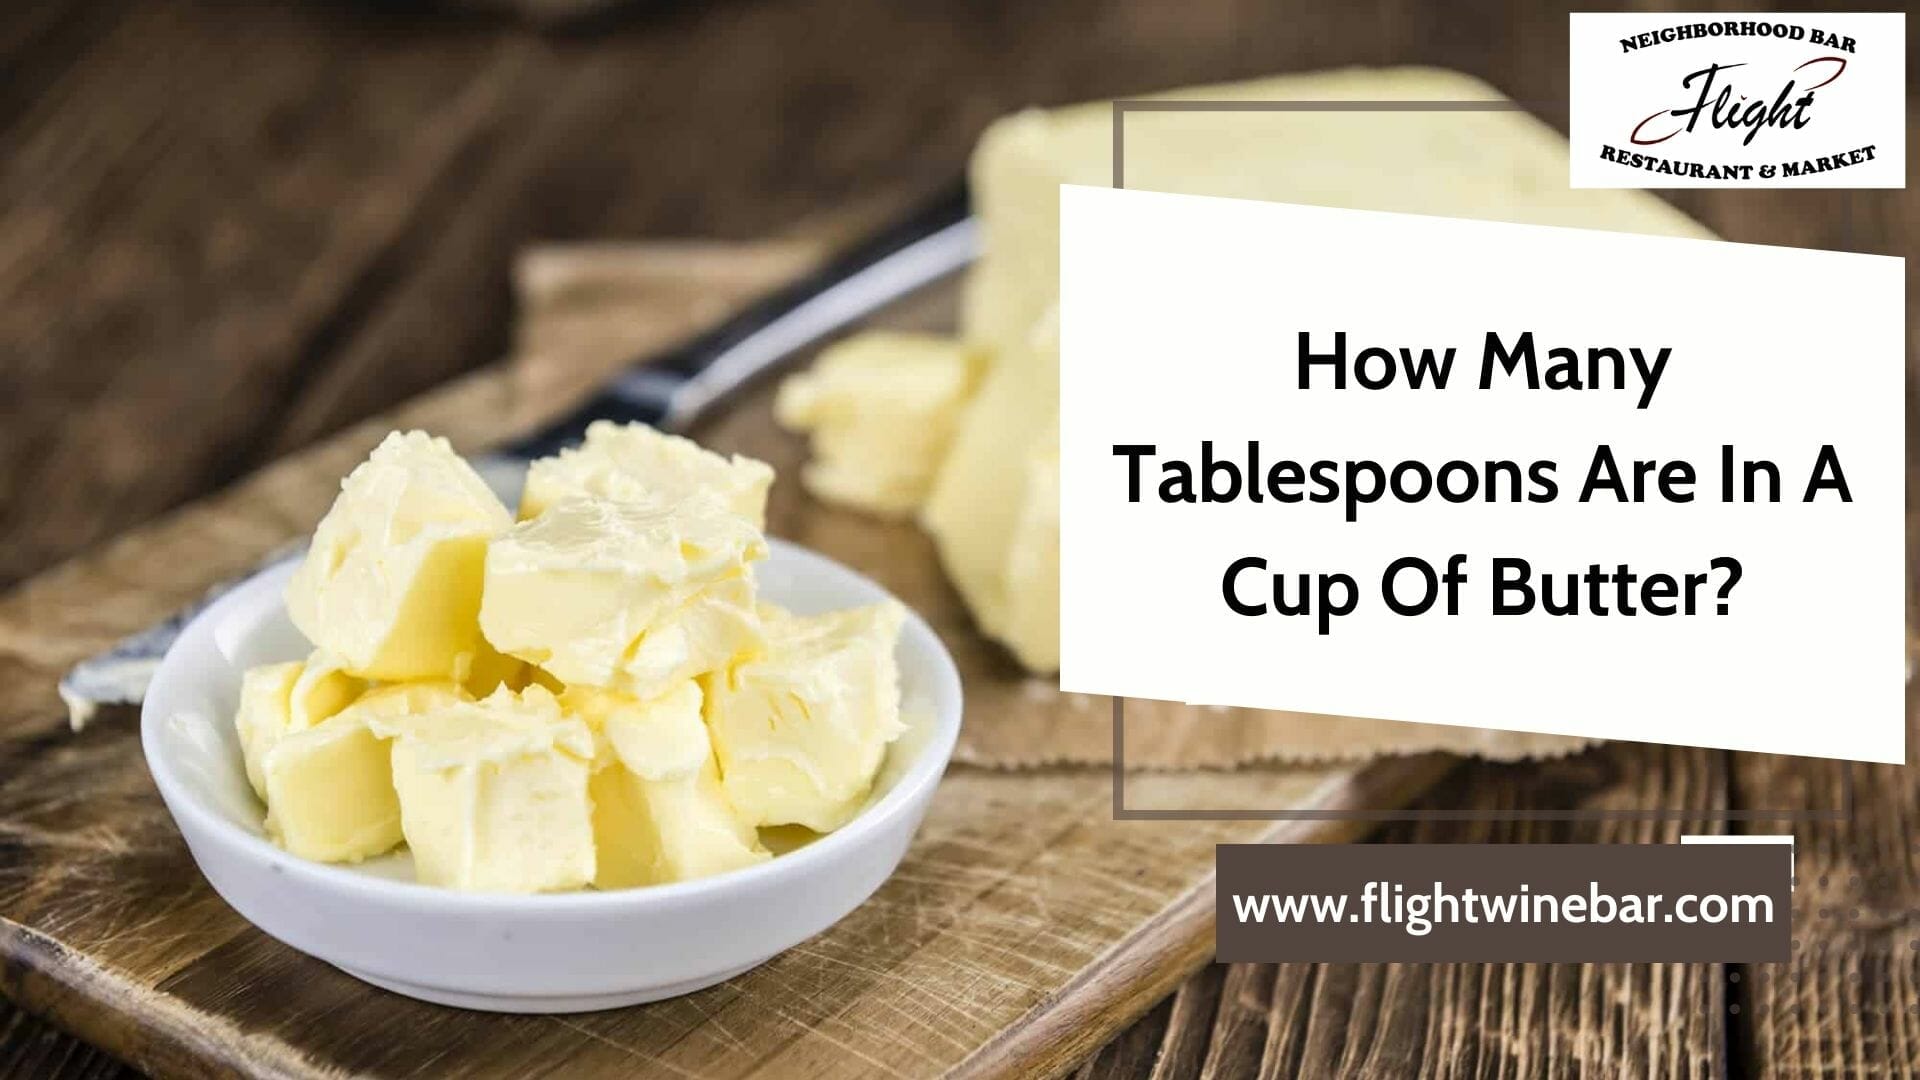 How Many Tablespoons Are In A Cup Of Butter